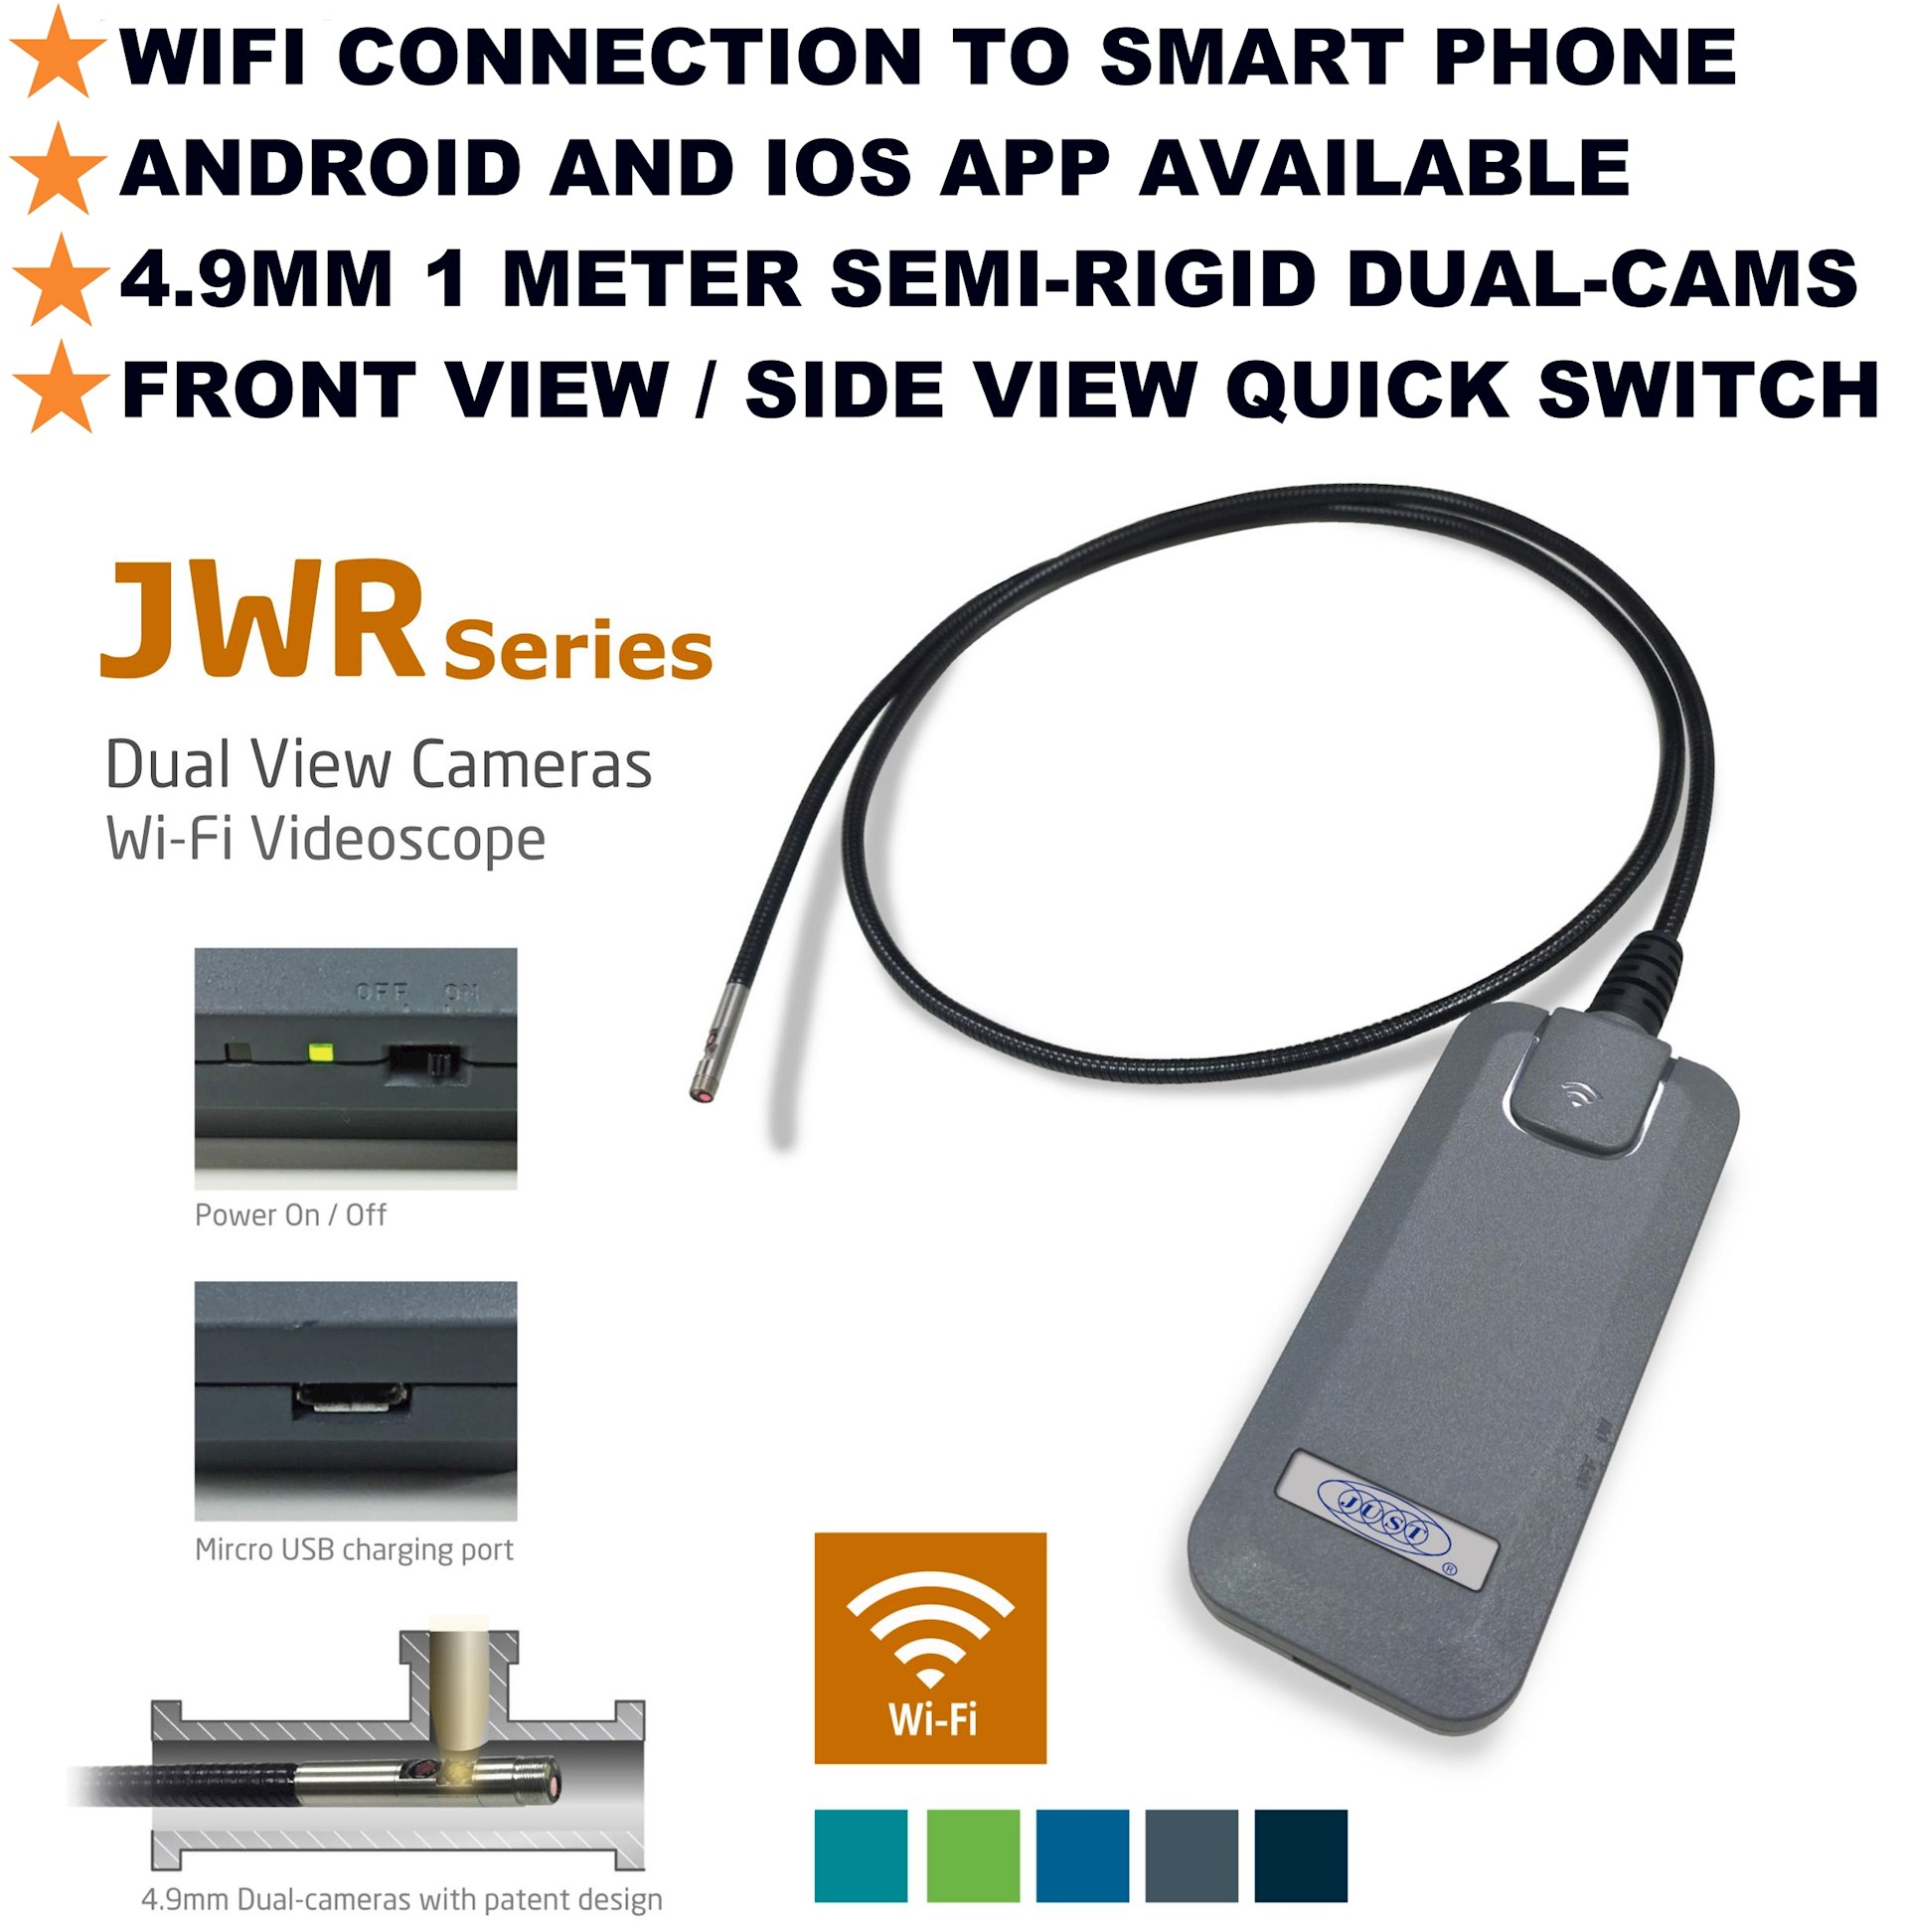 Camera-noi-soi-ky-thuat-so-wi-fi-ome-top-jwr-4901s